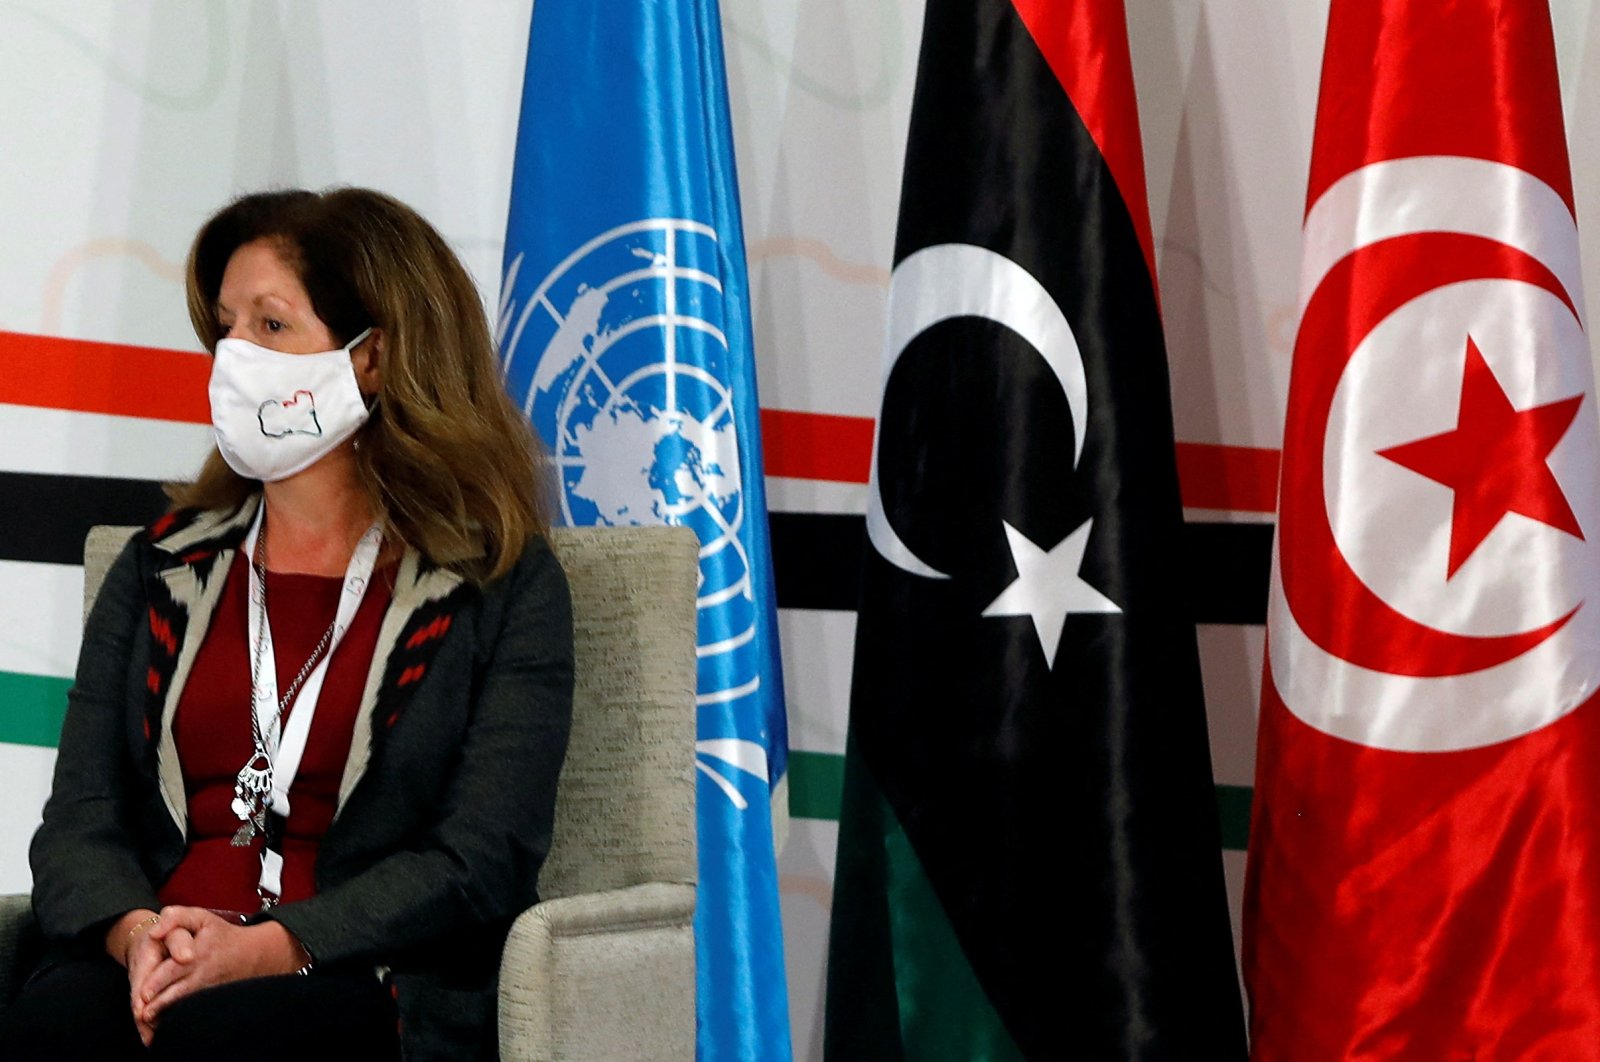 Deputy Special Representative of the U.N. Secretary-General for Political Affairs in Libya Stephanie Williams attends the Libyan Political Dialogue Forum in Tunis, Tunisia, Nov. 9, 2020. (Reuters File Photo)